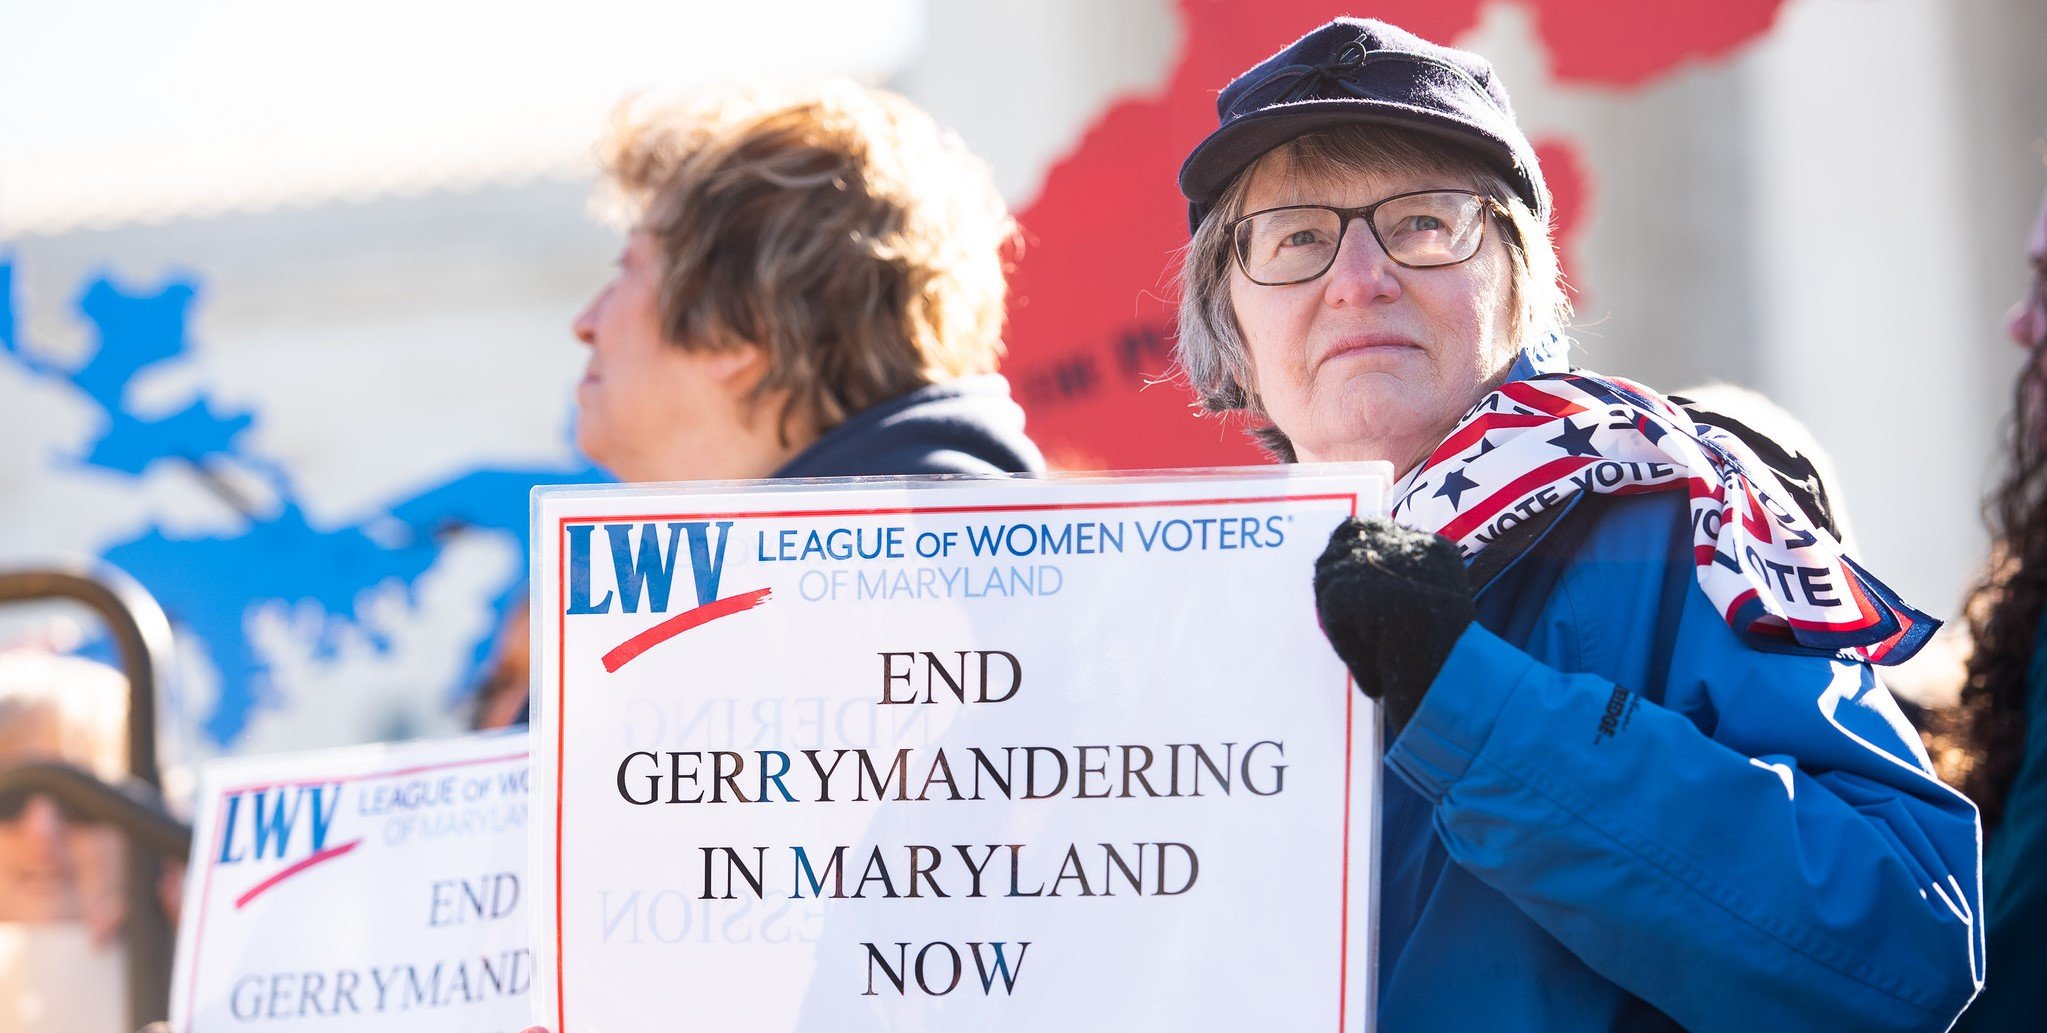 Woman outdoors at rally holding sign that reads "End Gerrymandering in Maryland Now"